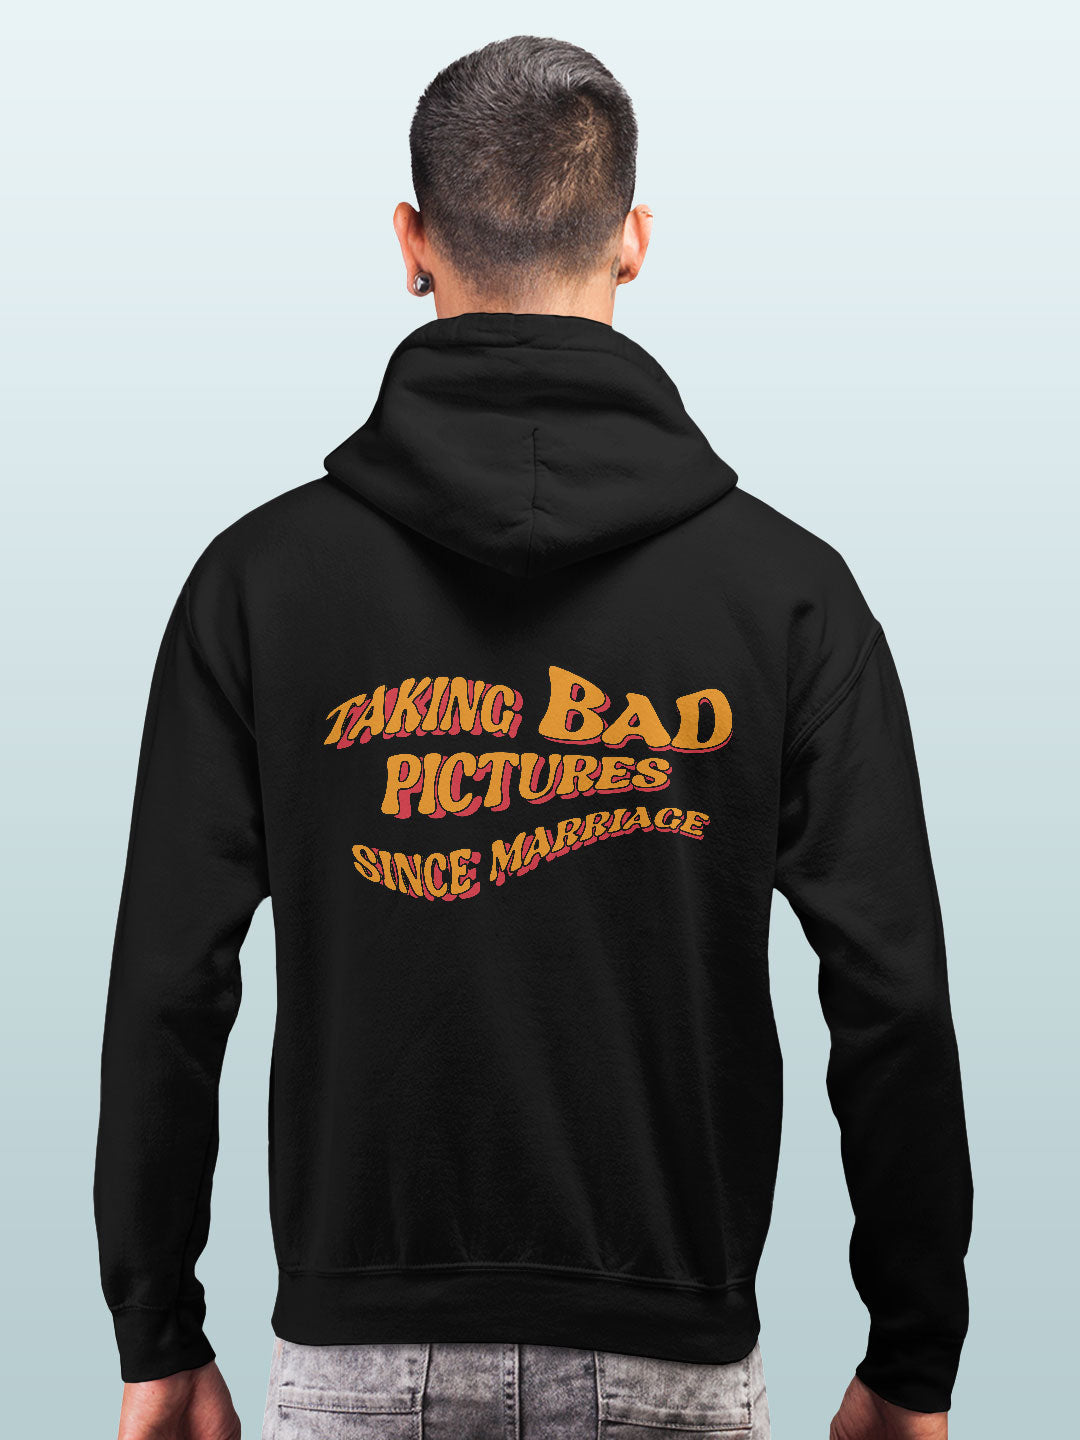 Bad Picture Hoodie